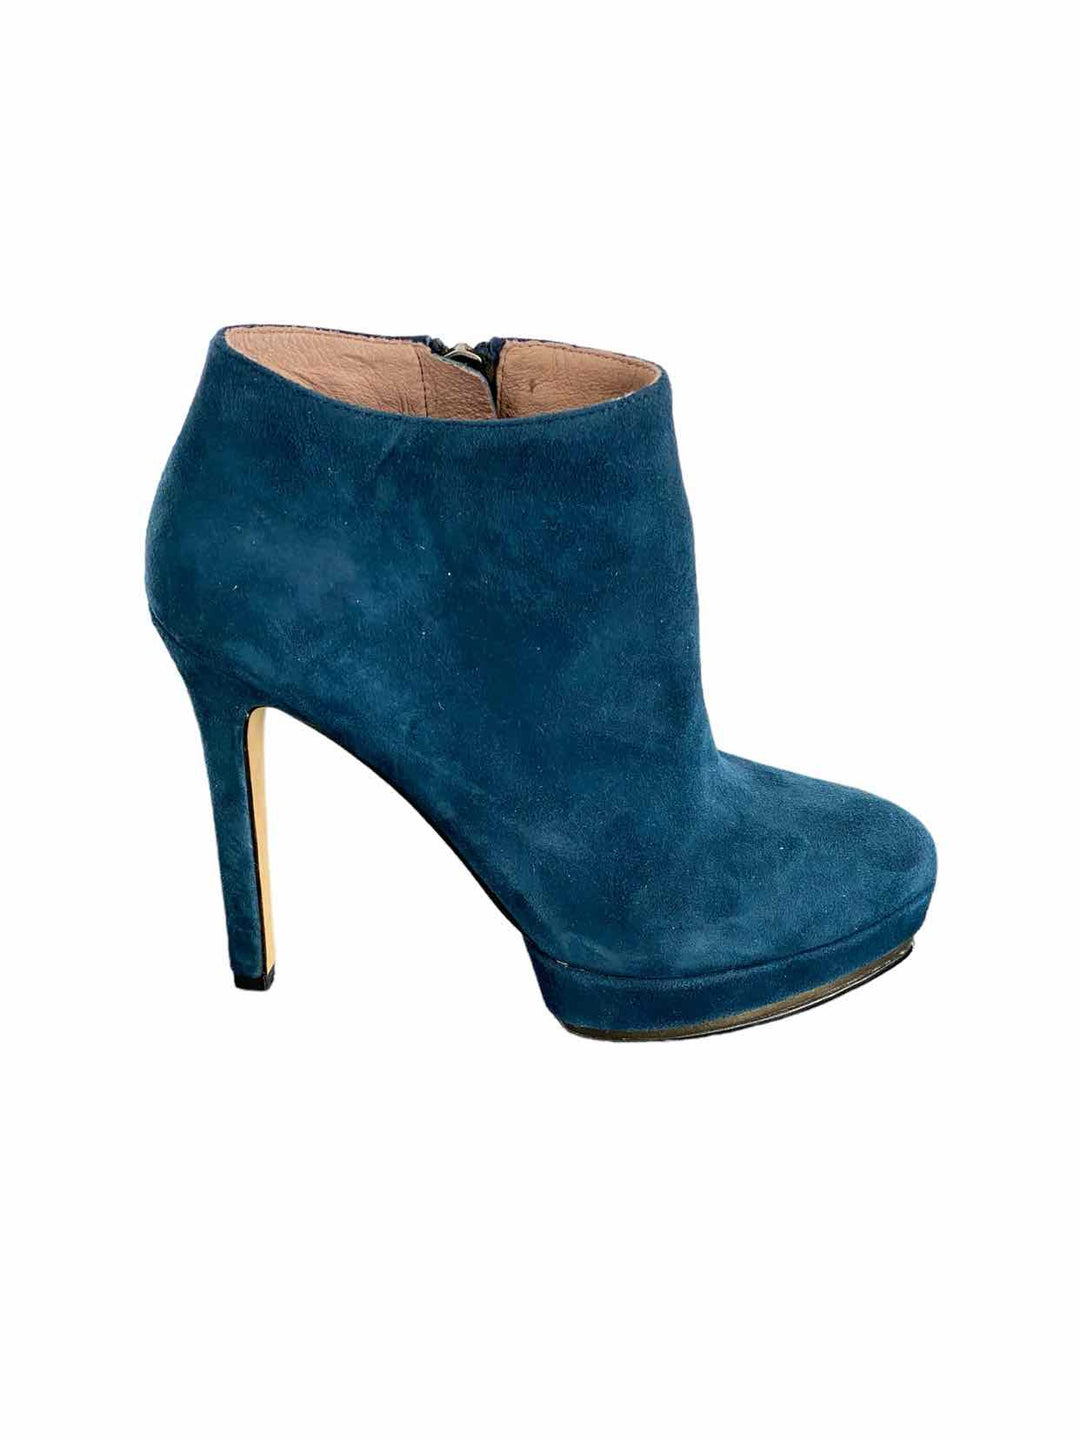 Vince Camuto Shoe Size 7 Blue Suede Boots(Ankle)